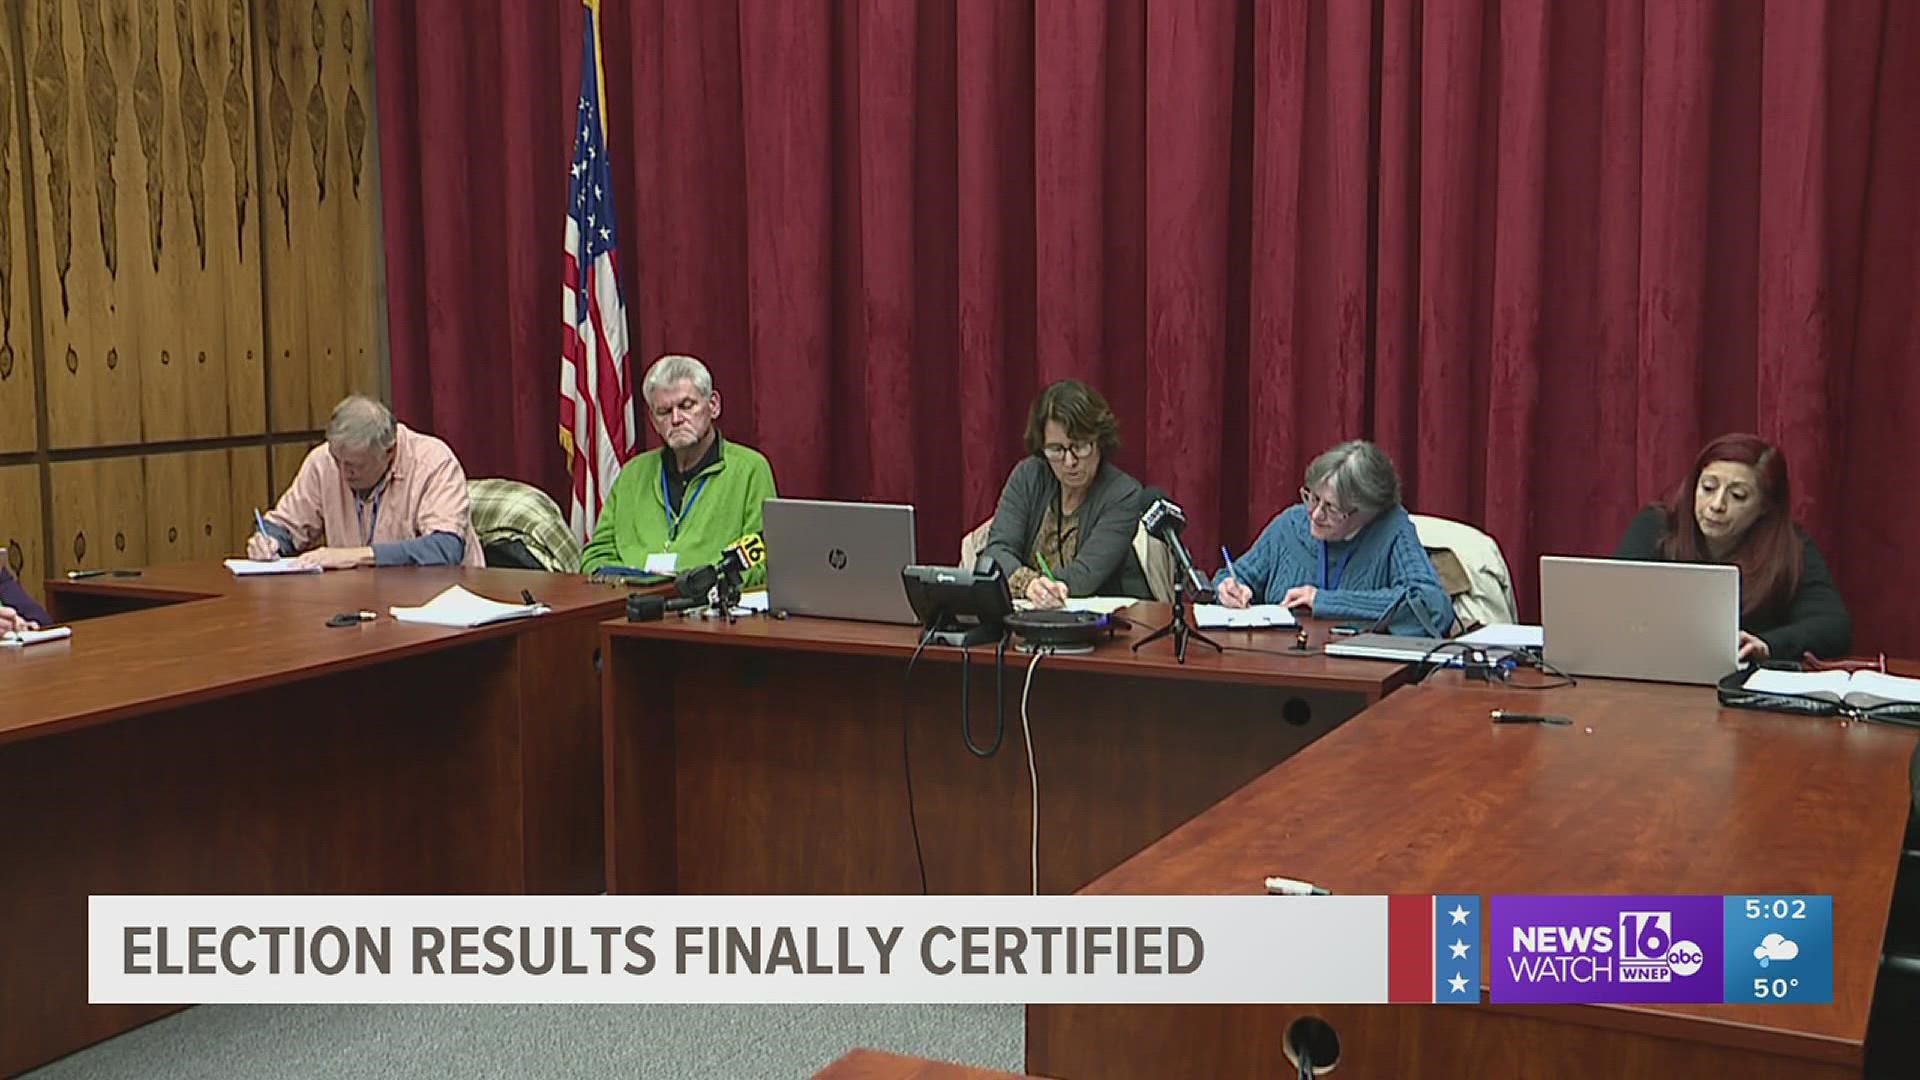 A day that's been weeks in the making — the certification of election results in Luzerne County.